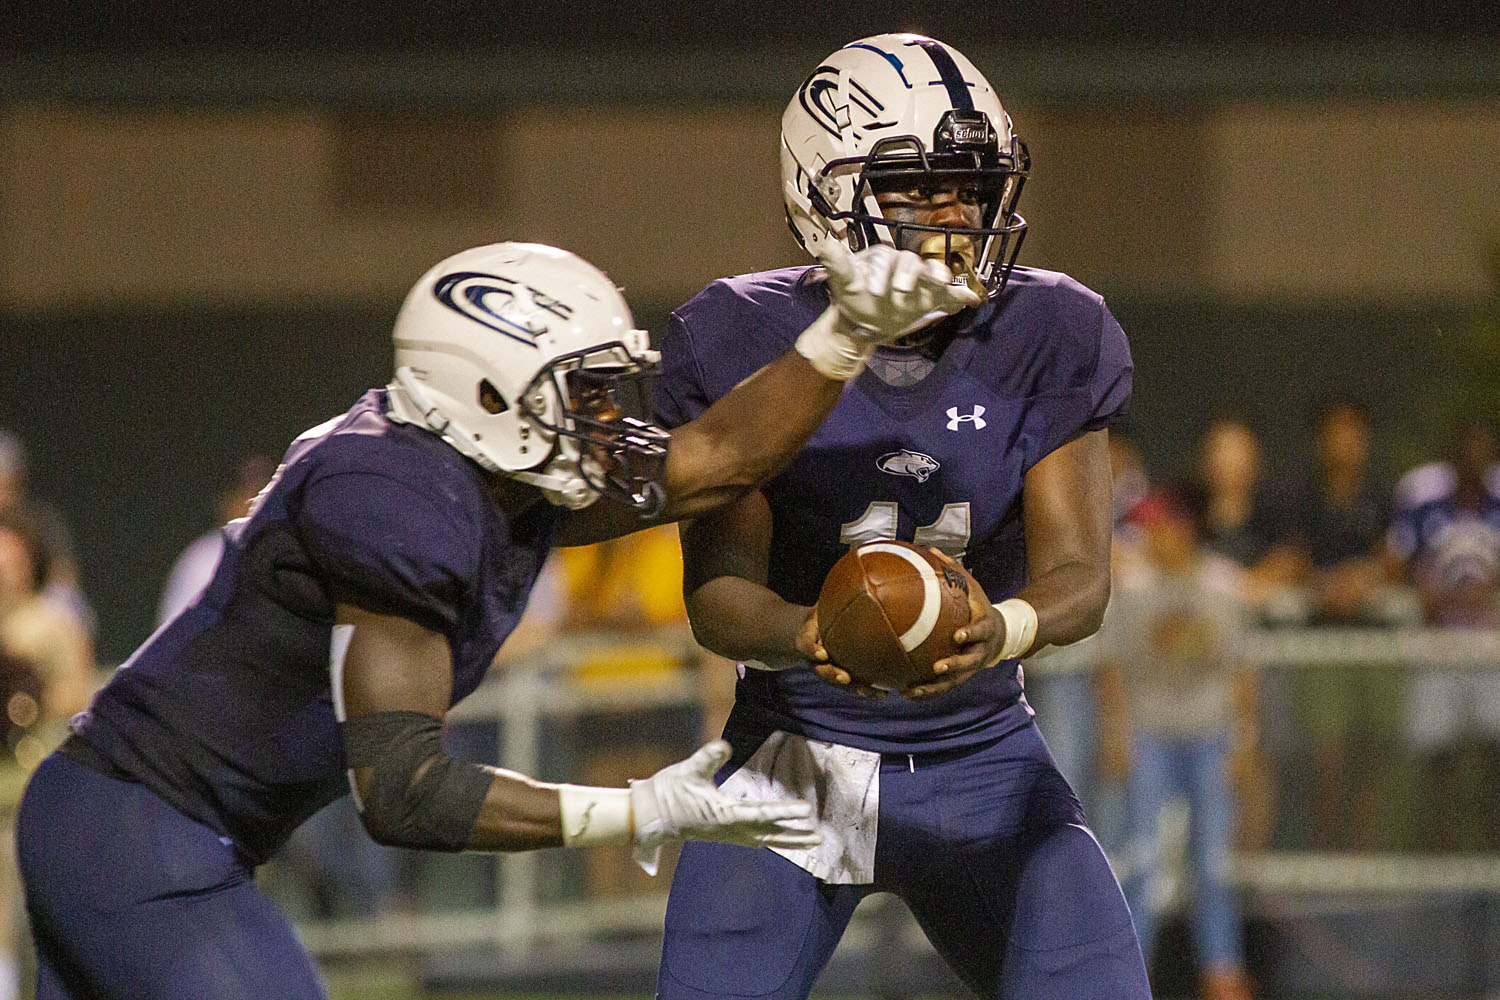 Clay-Chalkville grinds high-powered Helena offense to a halt in first-round playoff victory